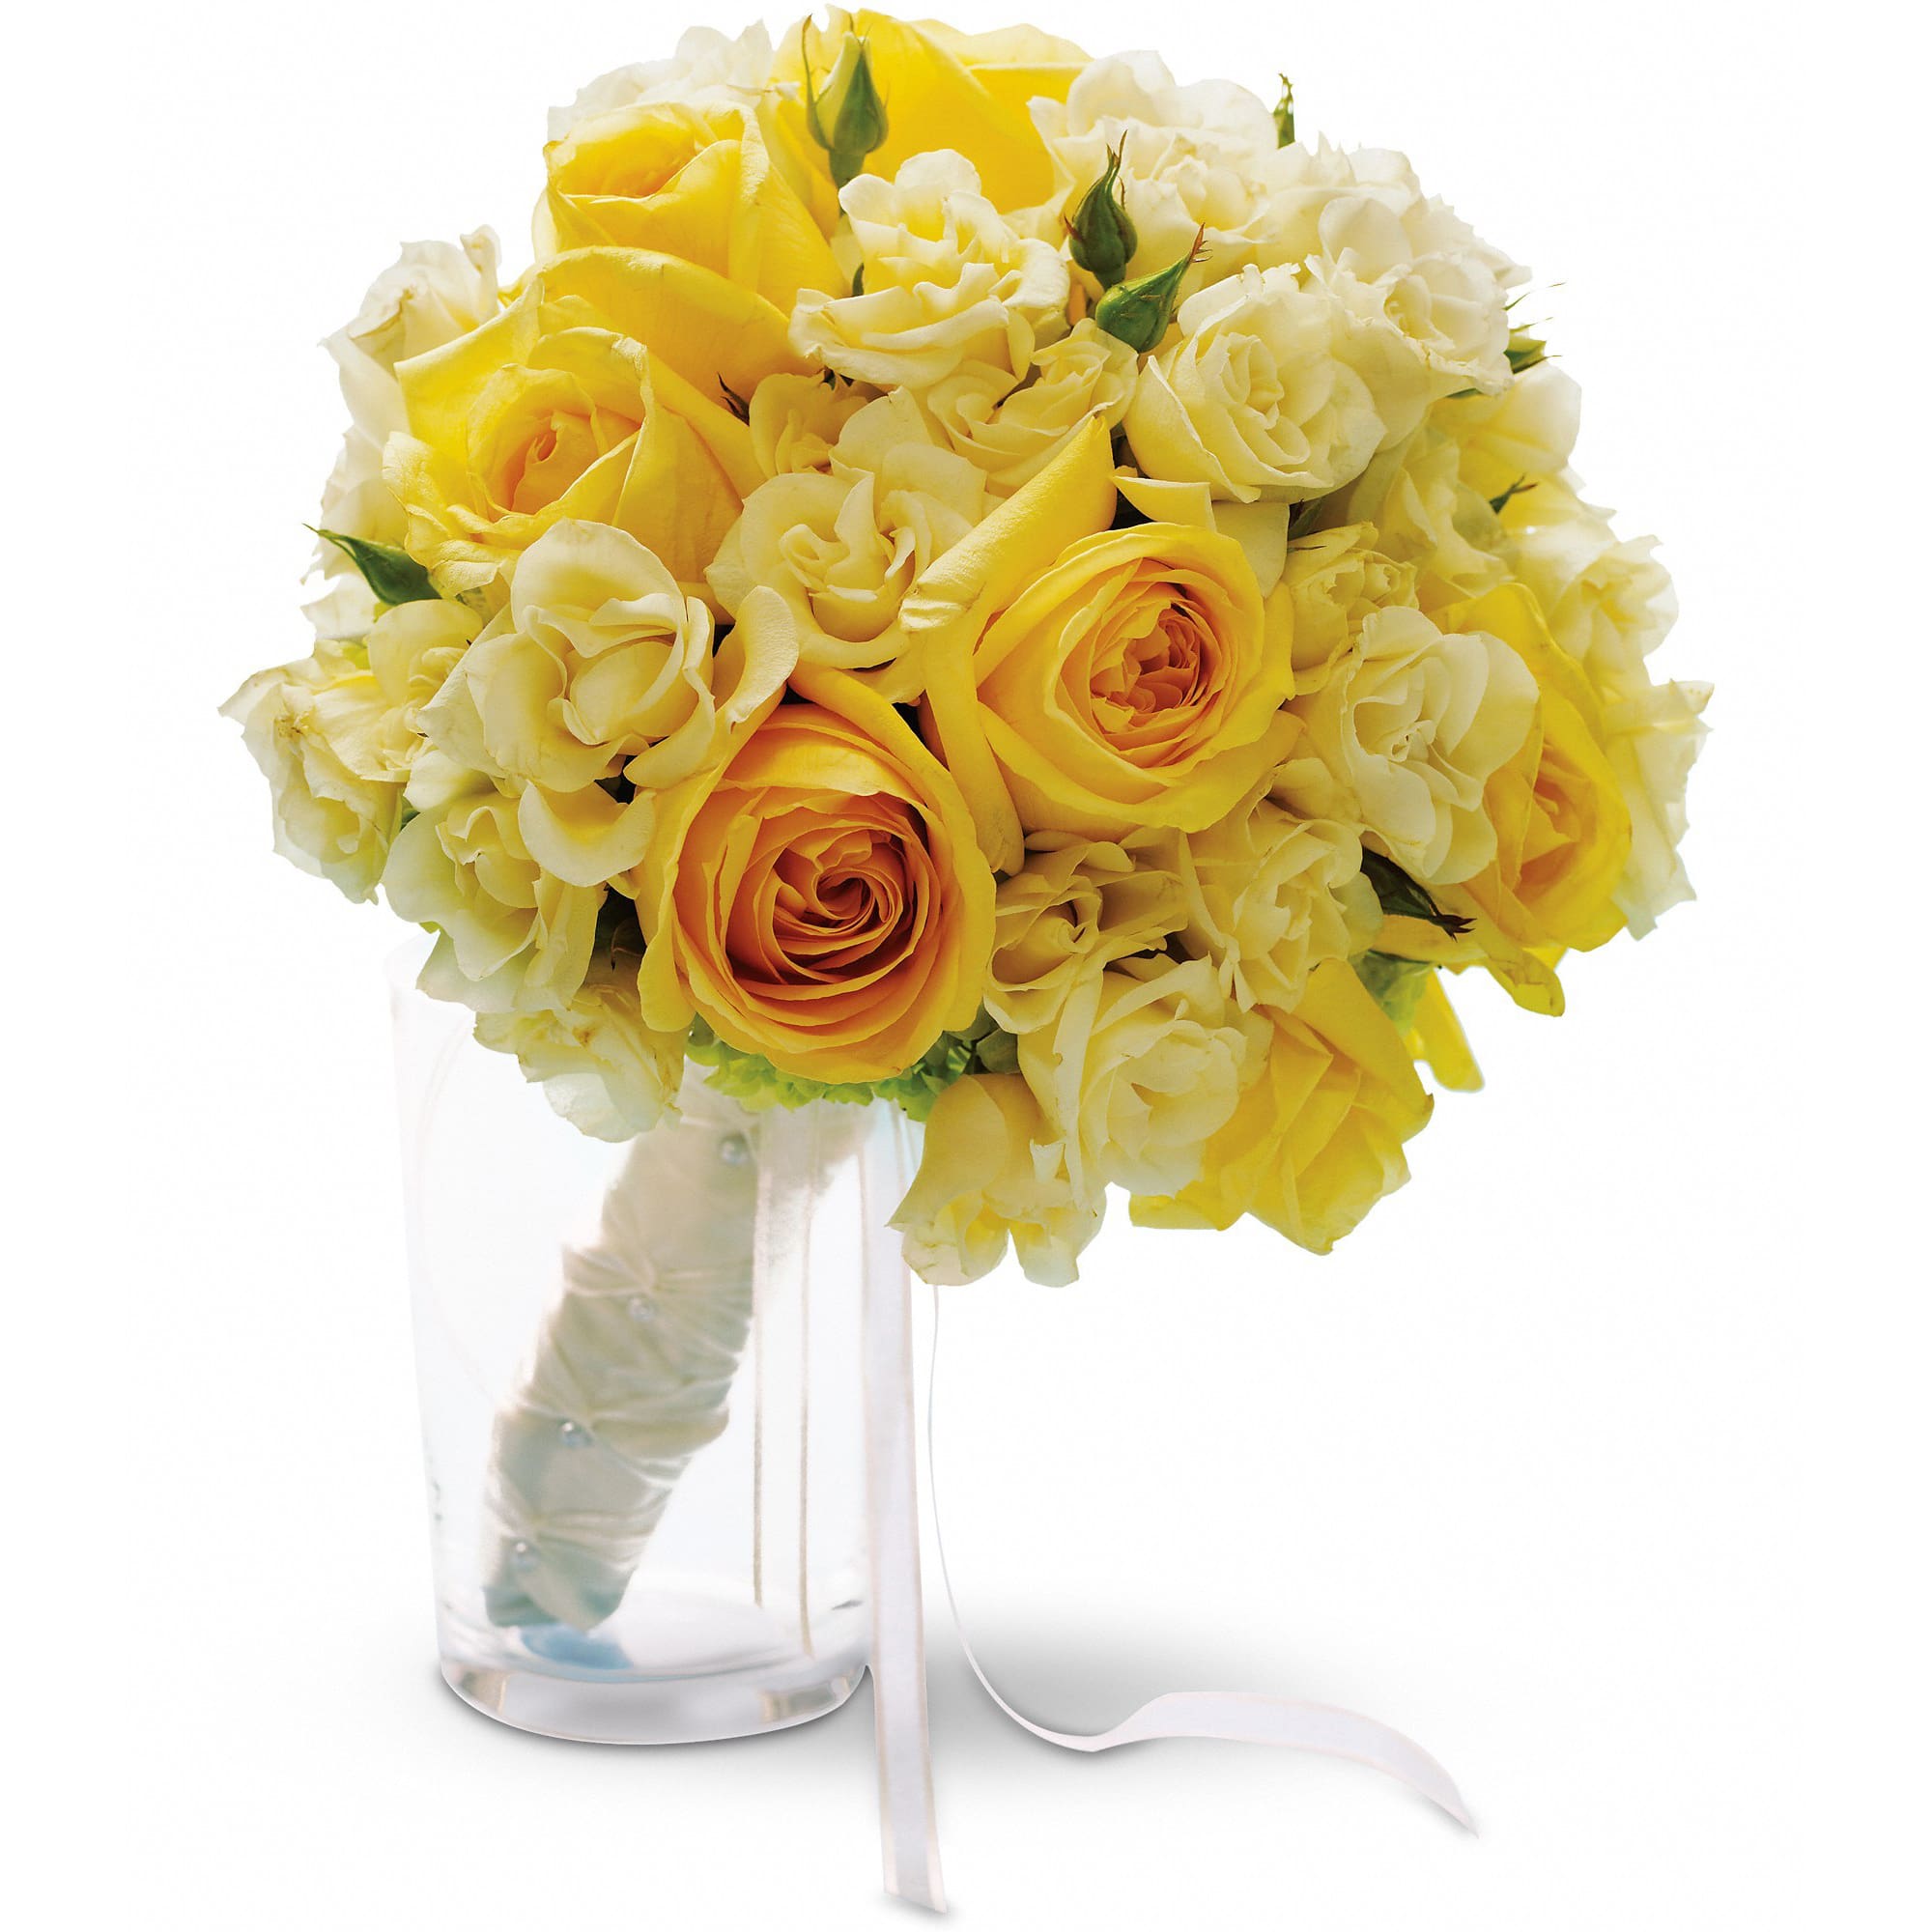 Sweet Sunbeams Bouquet  - Carry a sunbeam down the aisle with this bright mix of yellow and cream roses accented with green hydrangea.  Yellow and crÃ¨me roses accented with green viburnum.  Approximately 12 1/2&quot; W x 14&quot; H  Orientation: N/A      As Shown : T199-2A  